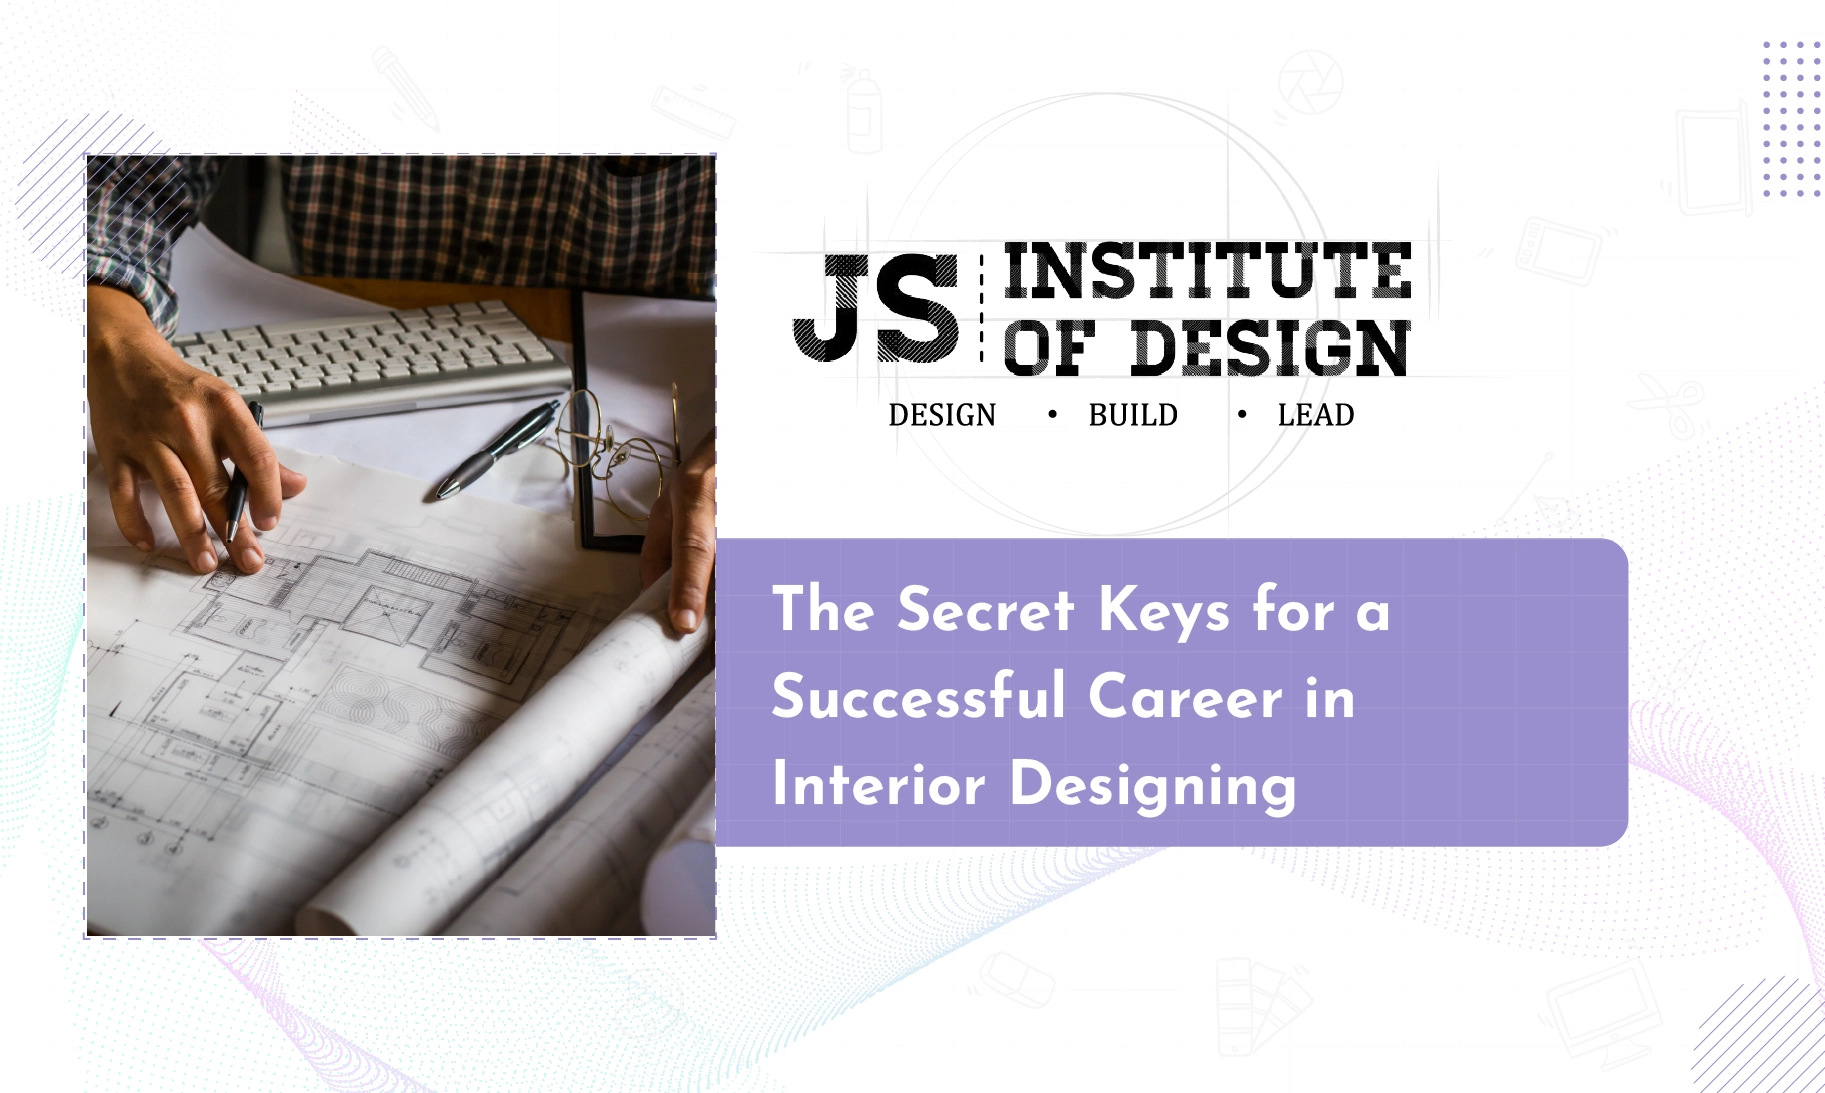 The Secret Keys for a Successful Career in Interior Designing